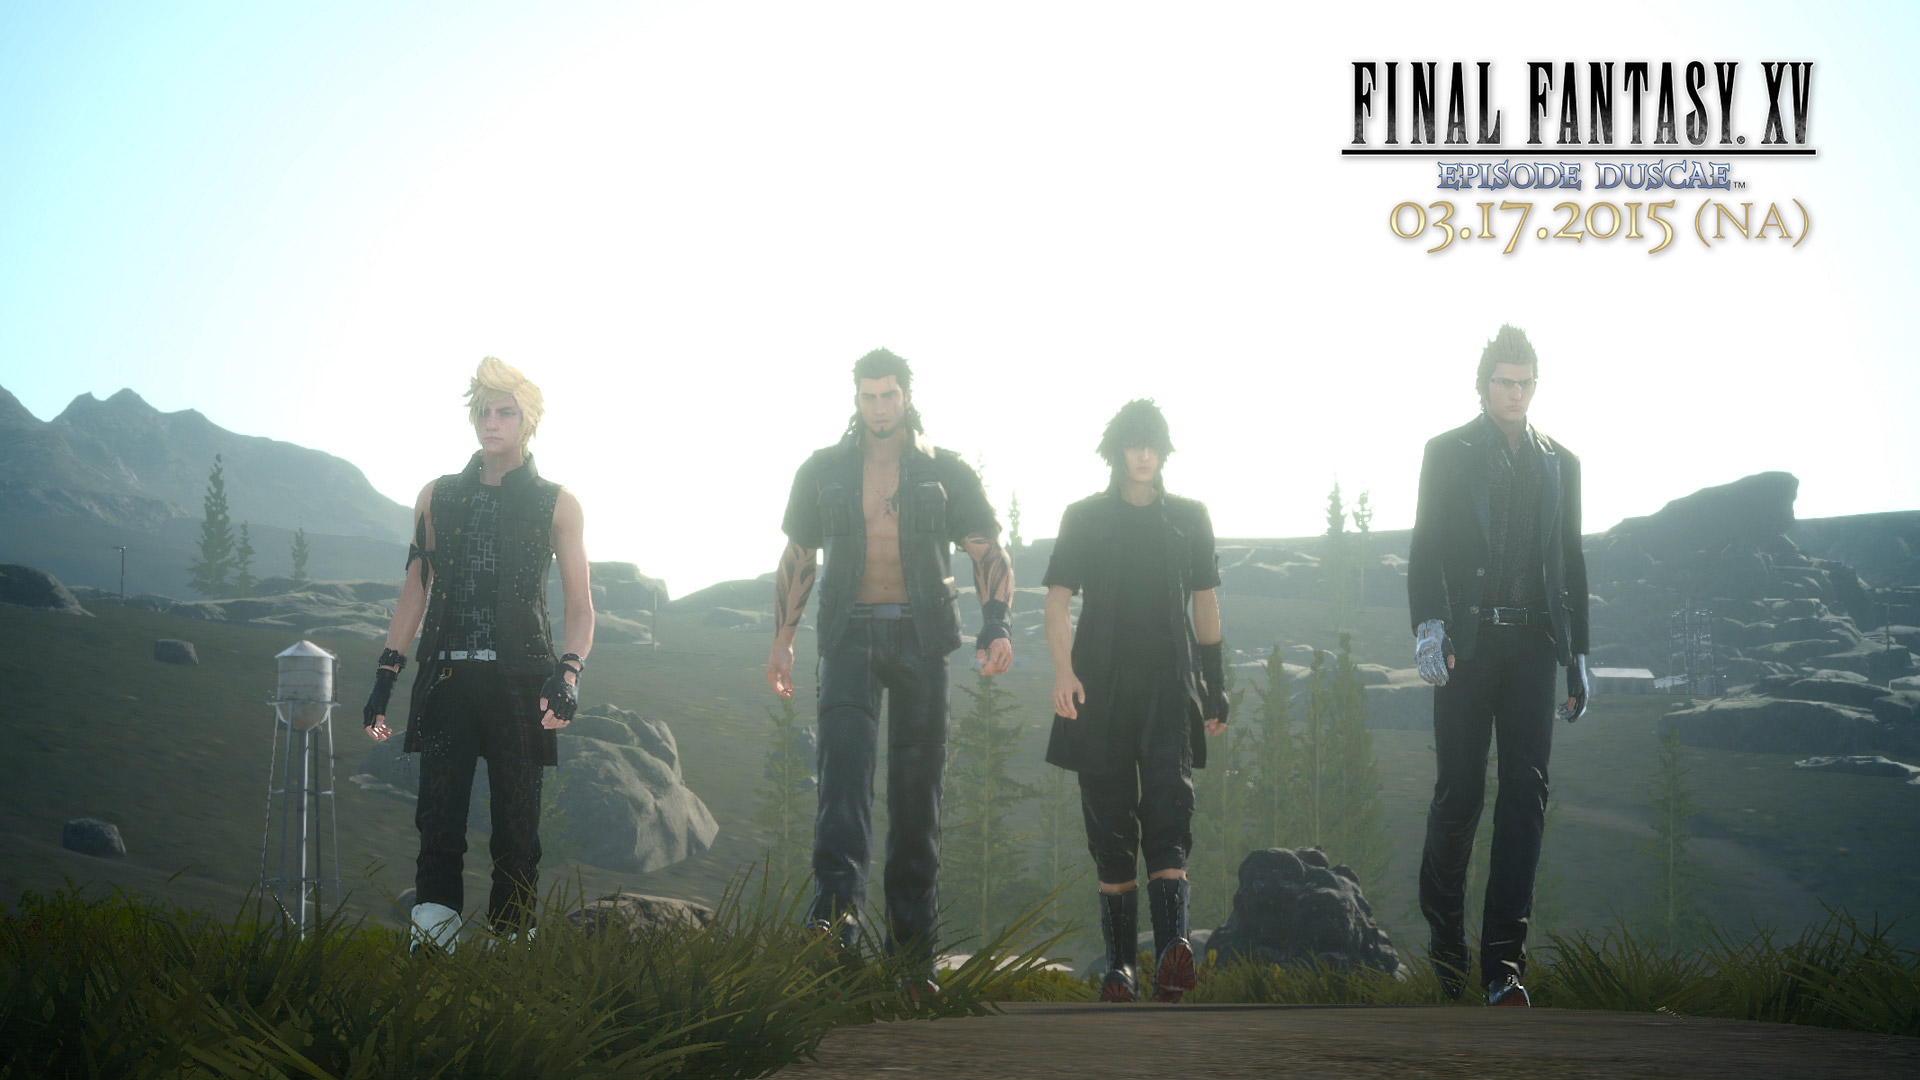 Free Download Final Fantasy Xv Wallpaper In 1920x1080 1920x1080 For Your Desktop Mobile Tablet Explore 46 Final Fantasy 15 Wallpapers Final Fantasy Hd Wallpaper Final Fantasy Wallpapers 1920x1080 Final Fantasy 14 Wallpaper Hd